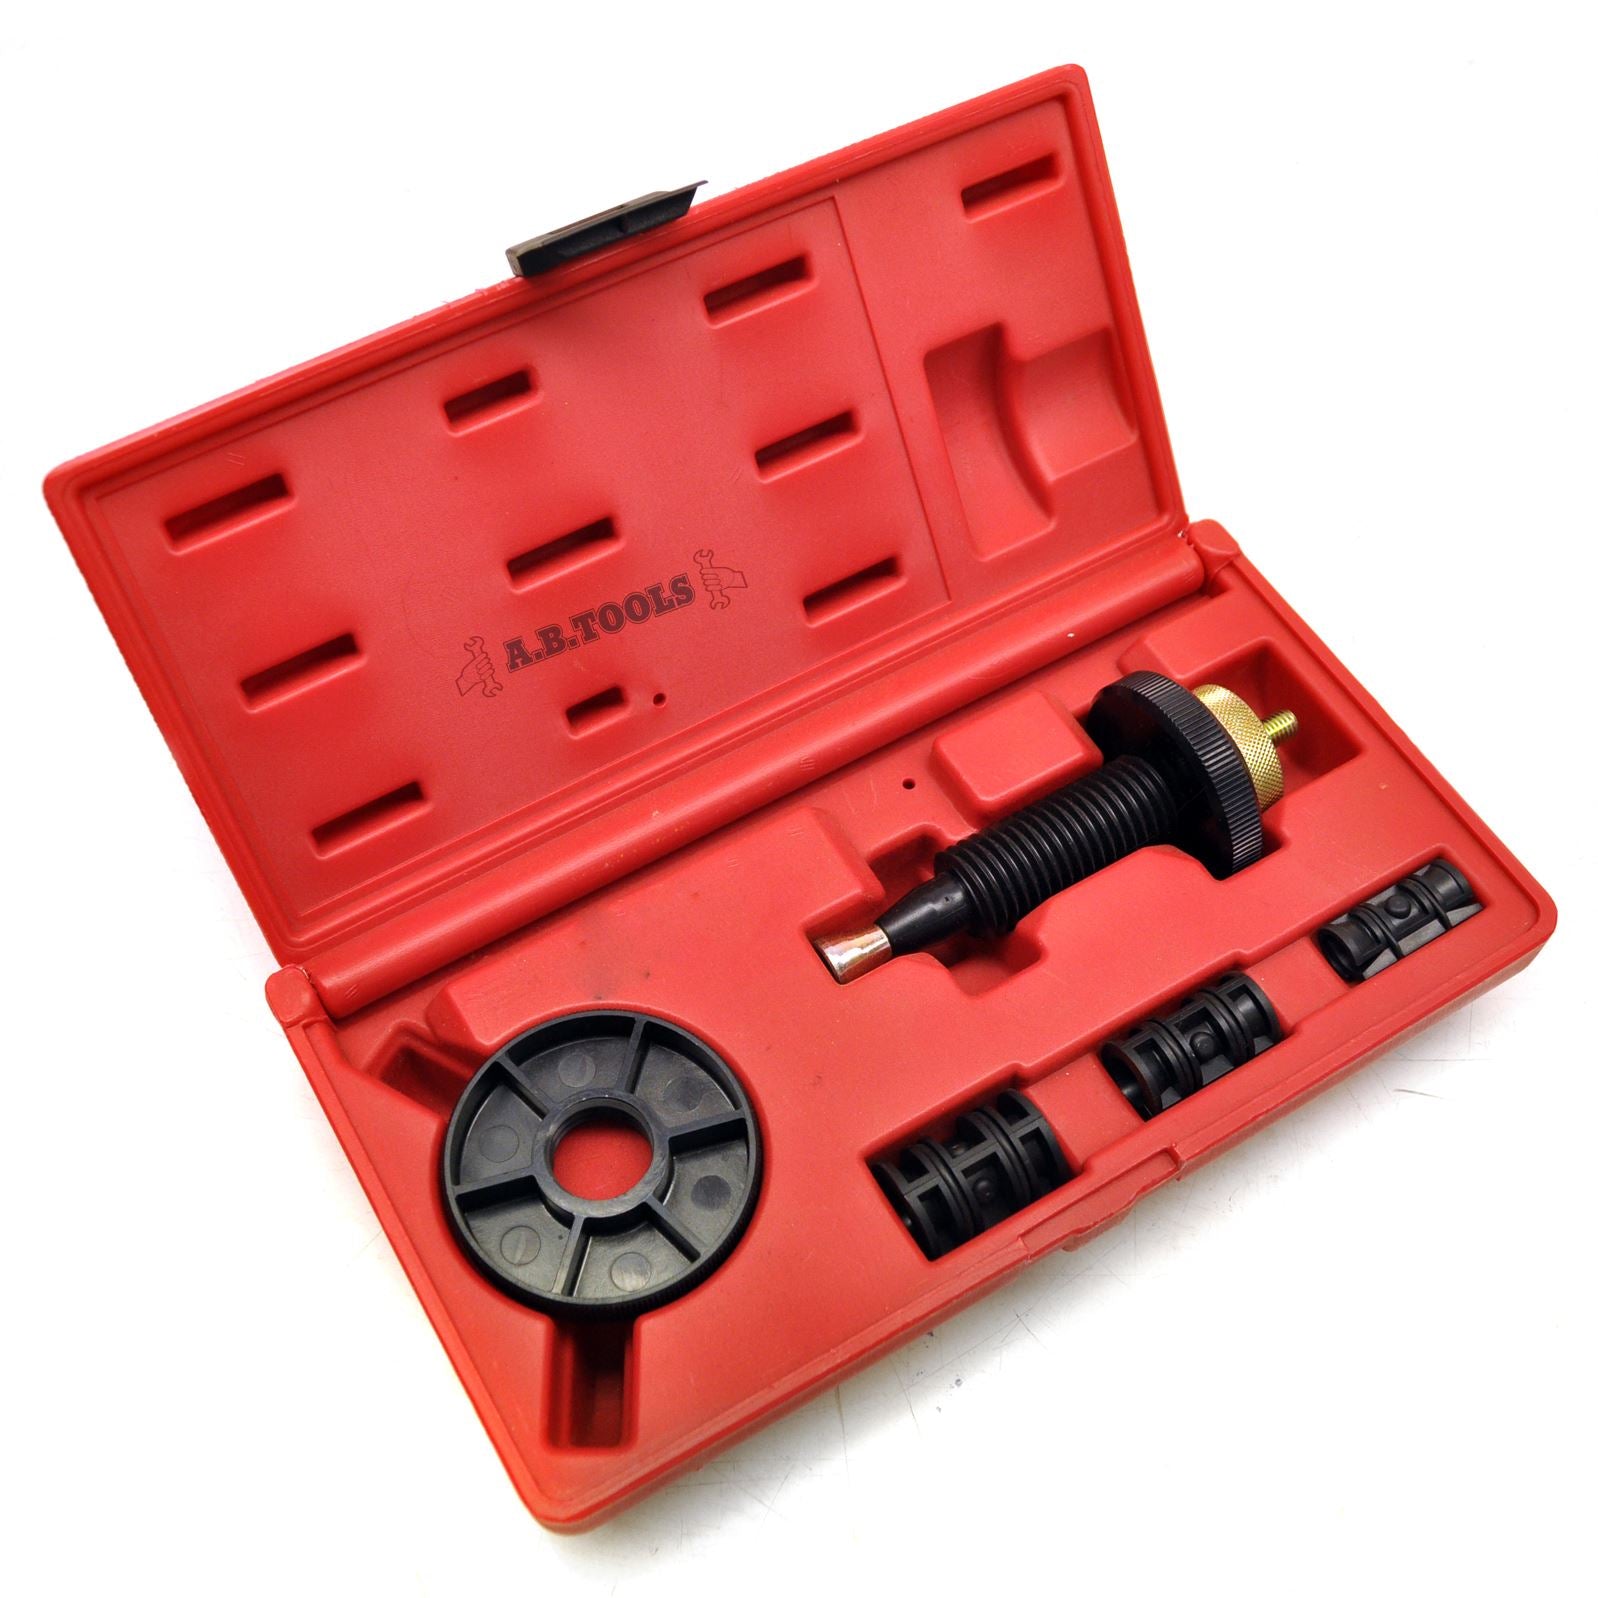 Clutch alignment tool / universal / flywheel tool / installer / remover AT149